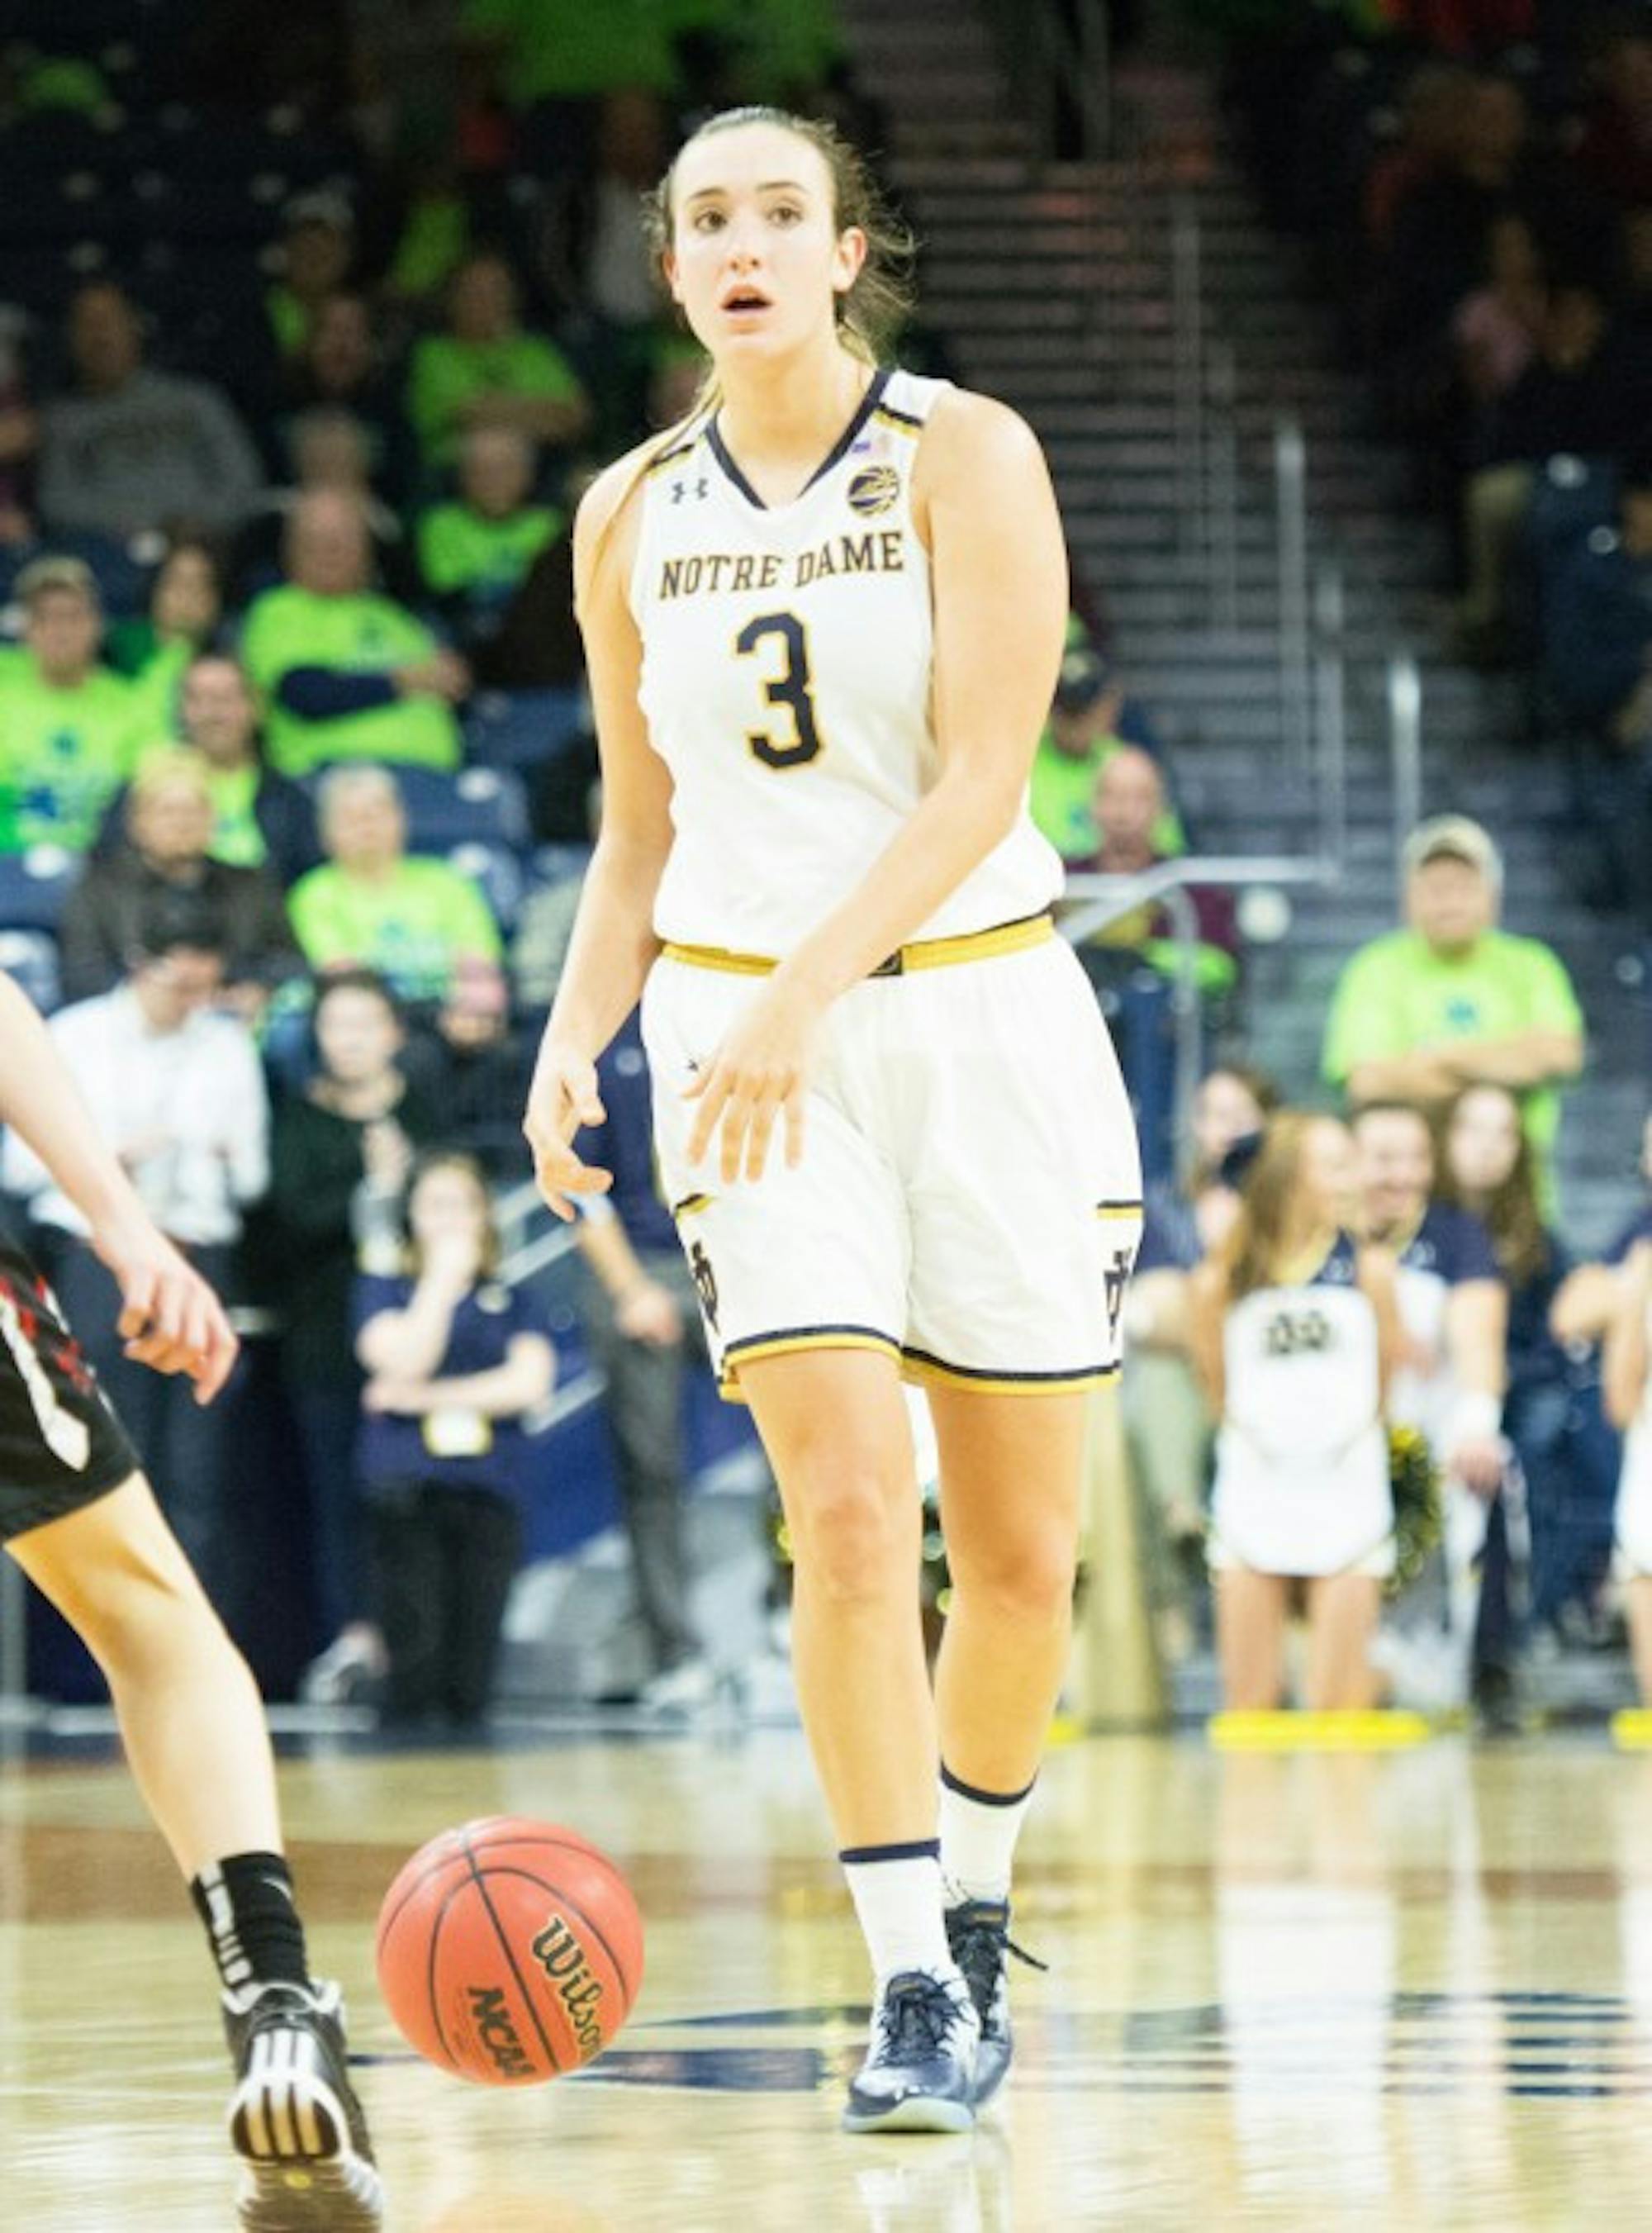 Irish sophomore guard Marina Mabrey brings the ball up the court during Notre Dame’s 129-50 win over Roberts Wesleyan on Nov. 3.